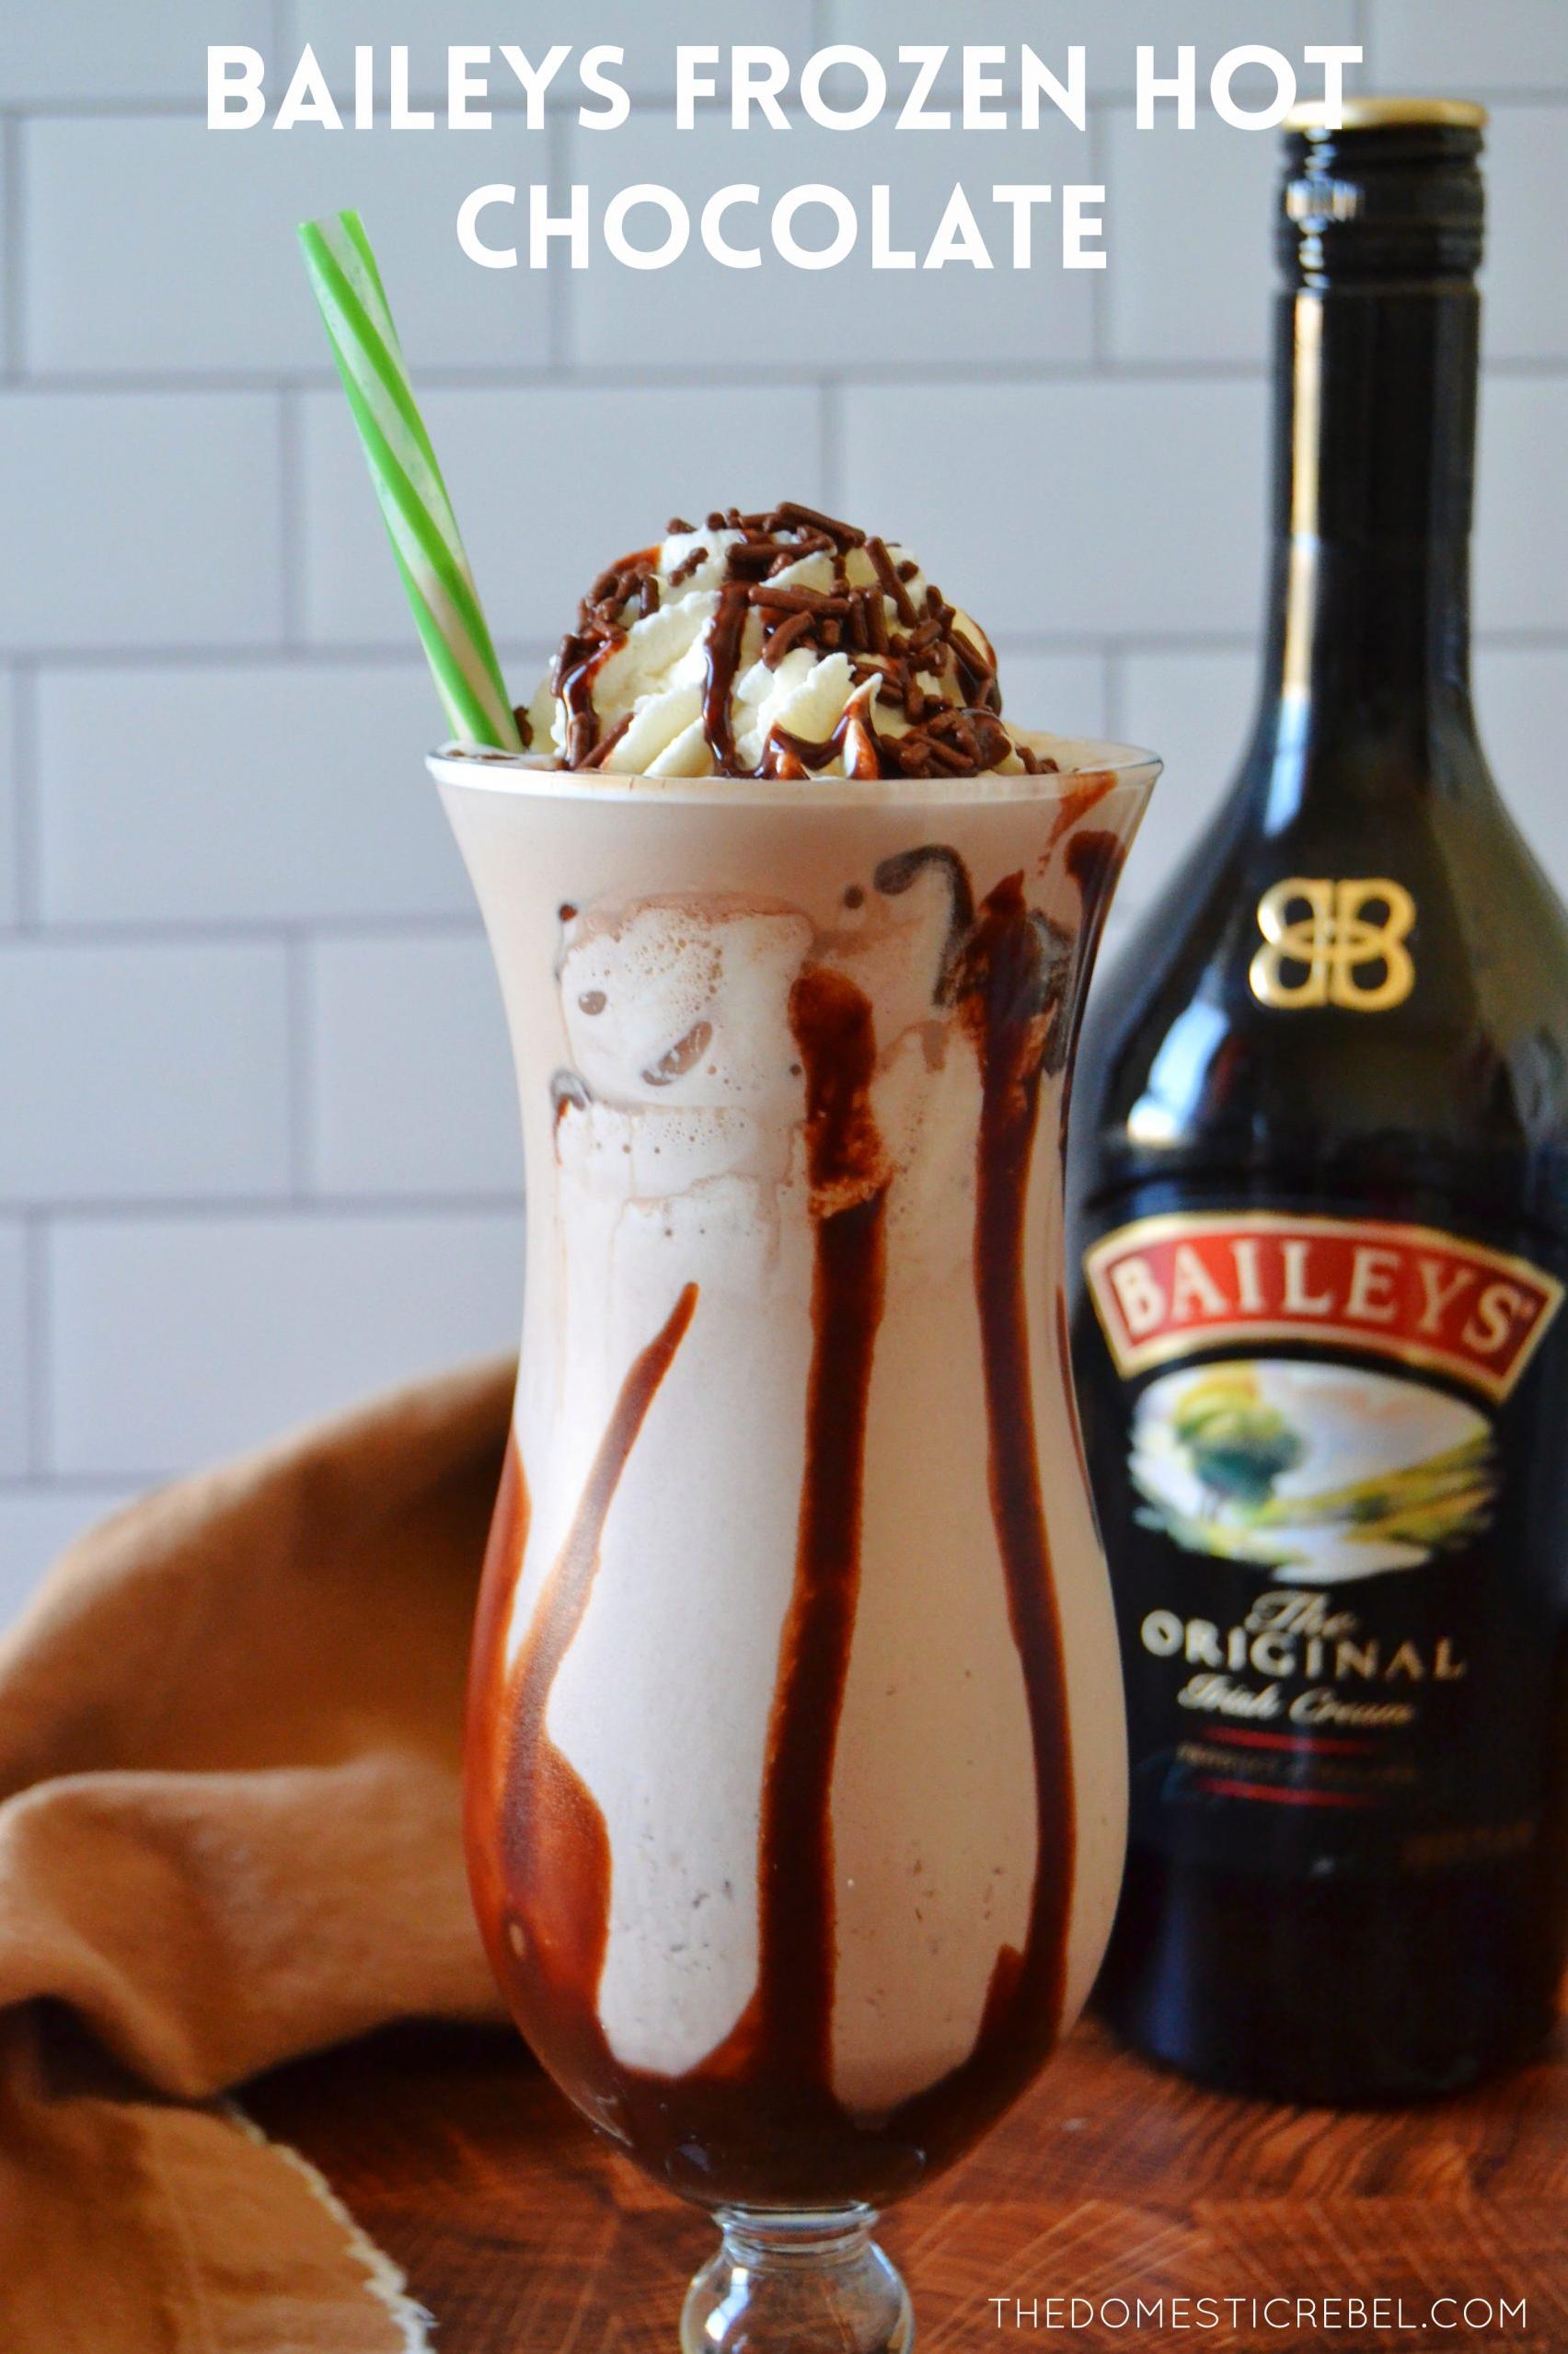  Satisfy your sweet tooth with this creamy Baileys Irish Creme!